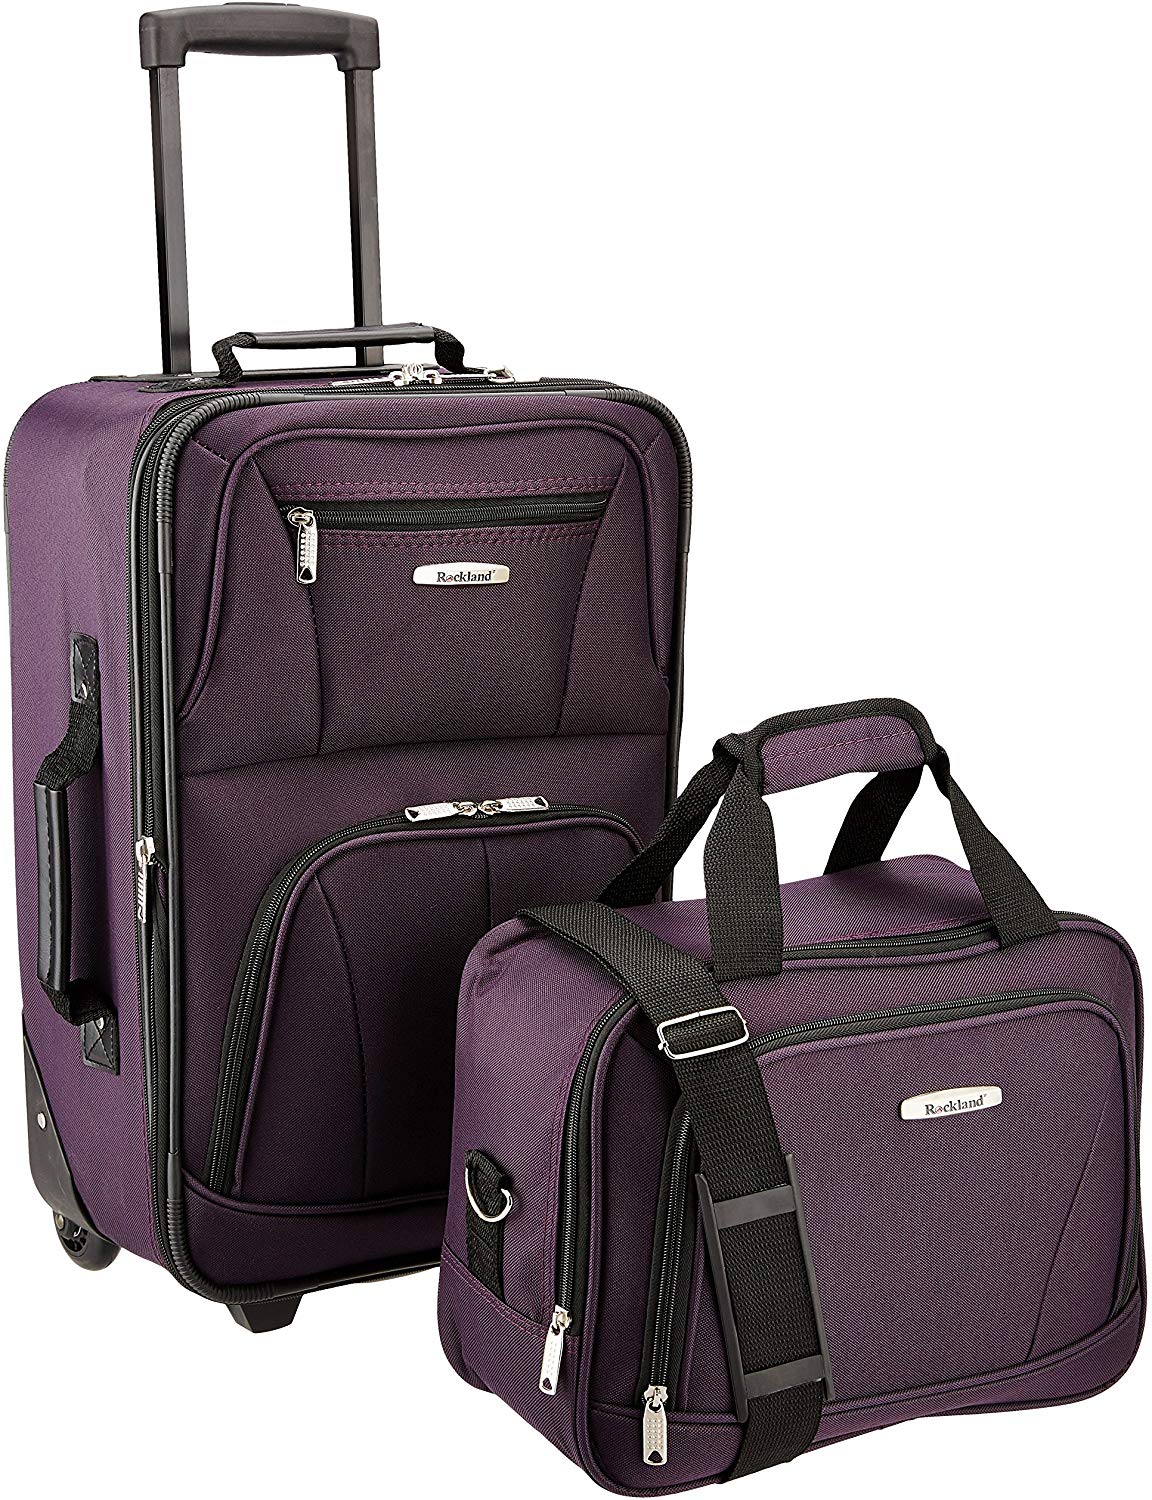 ONLY $26.99 for this Luggage Set w/ 4,000+ 5 Star Reviews! | Freebie Depot